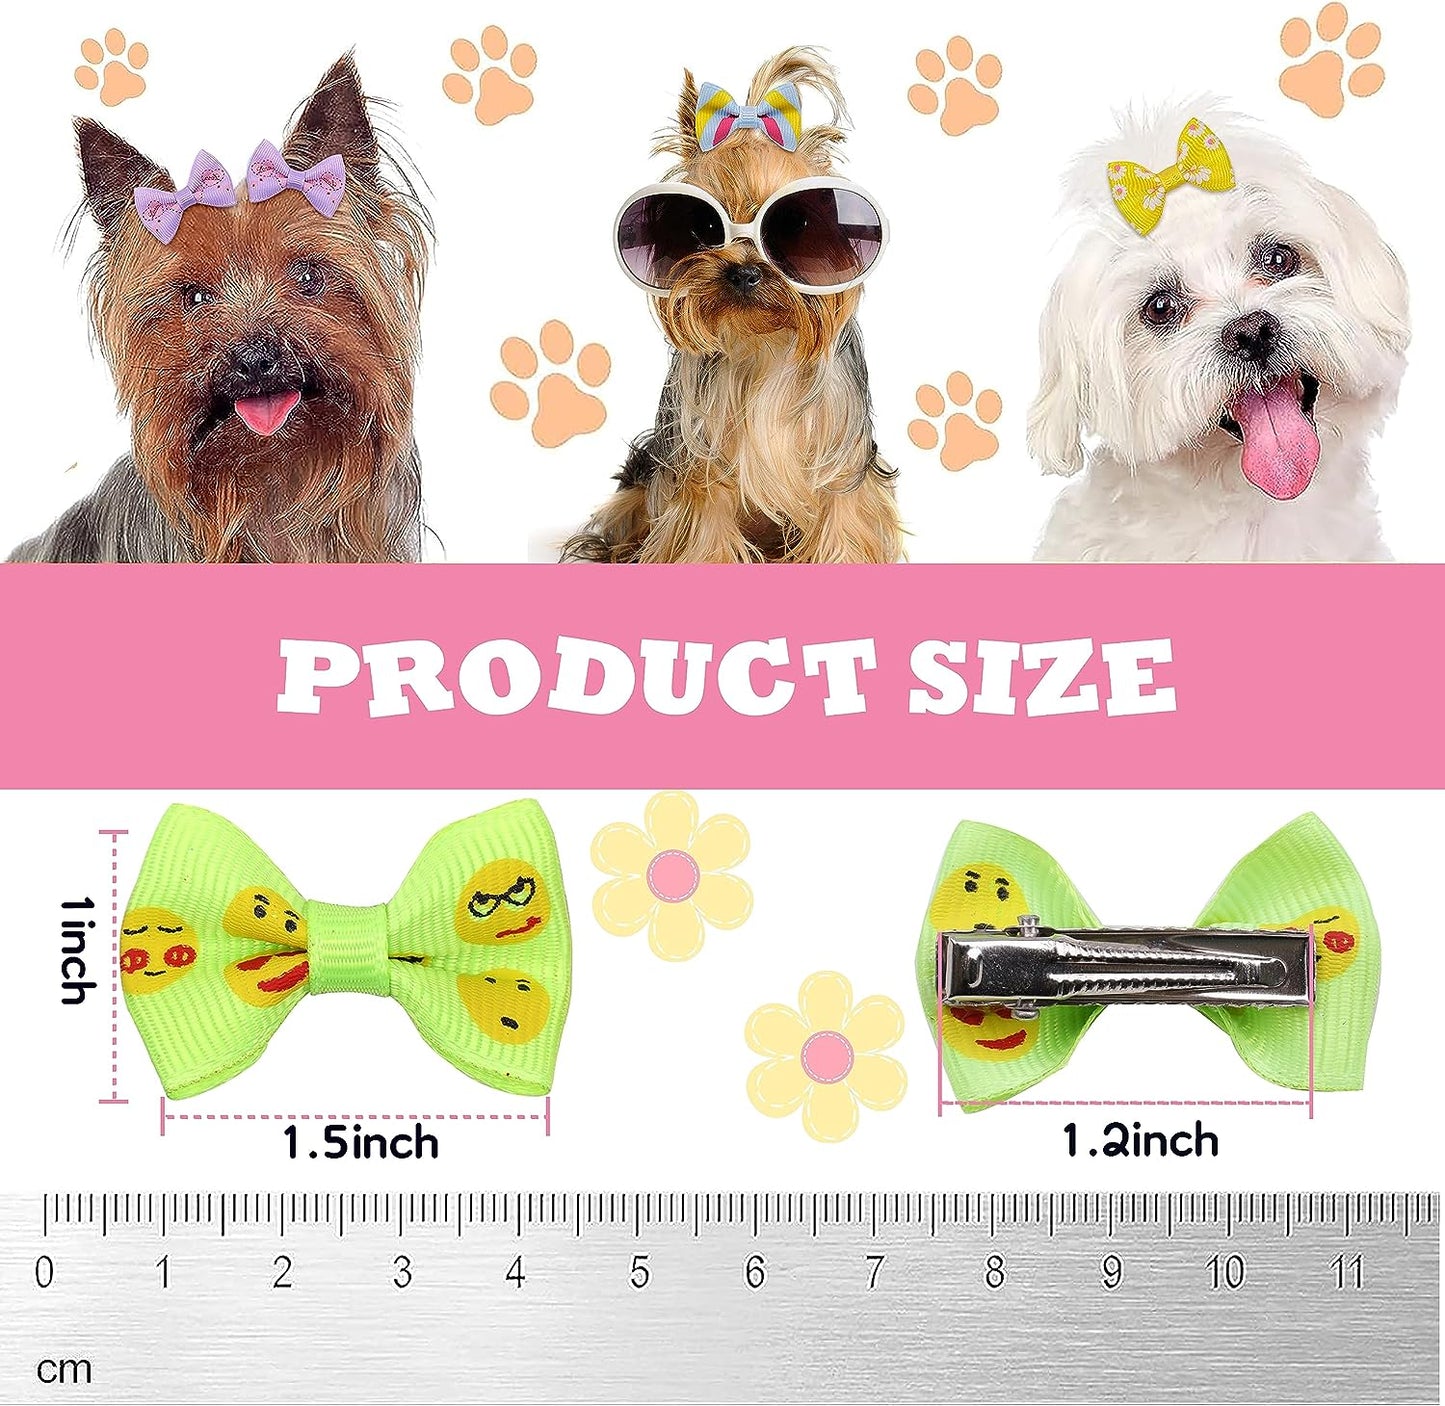 60PCS (30 Paris) Cute Puppy Dog Small Bowknot Hair Bows with Metal Clips Handmade Hair Accessories Bow Pet Grooming Products (60 Pcs,Cute Patterns)